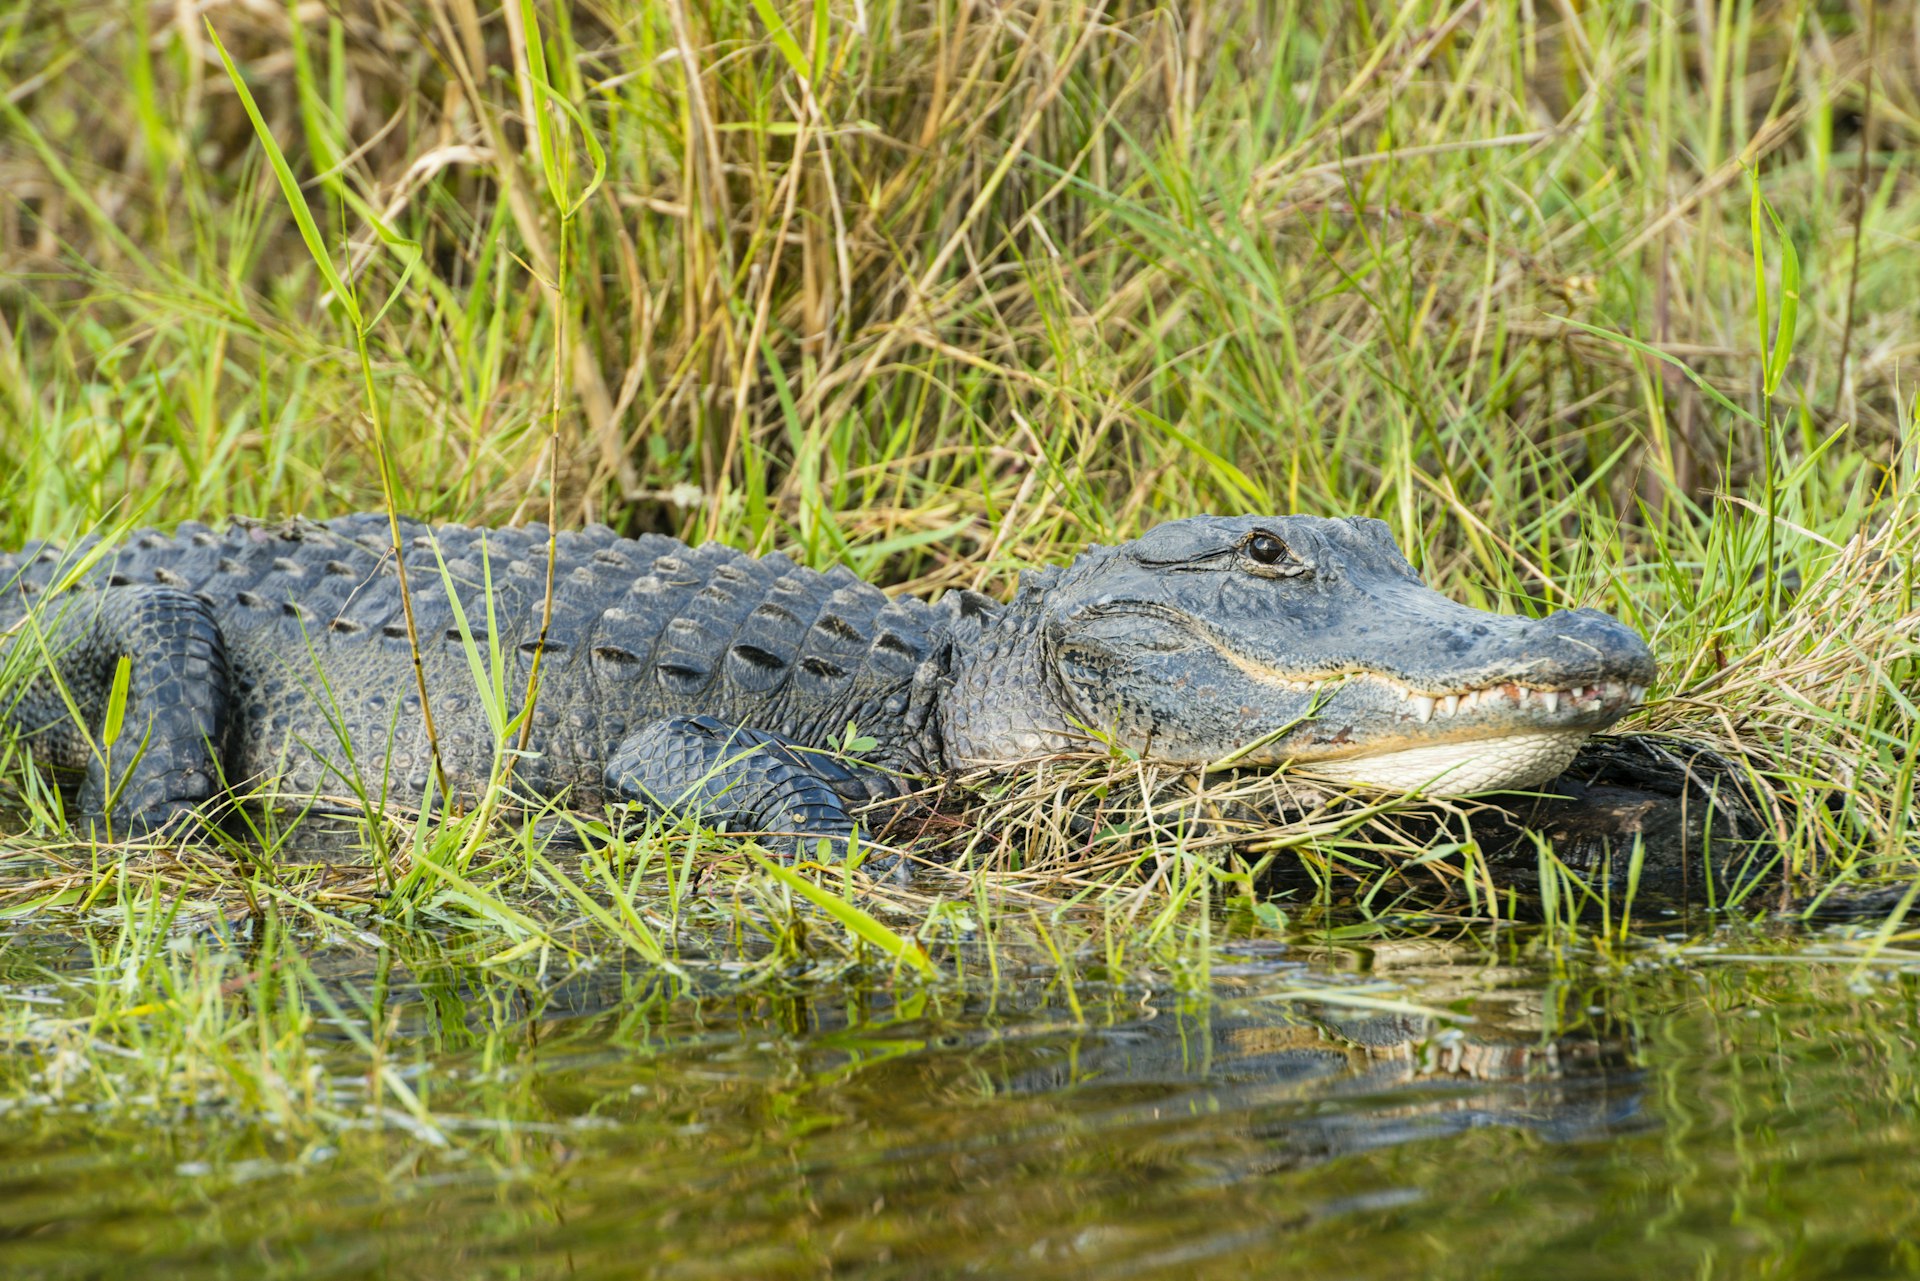 An alligator swims in a swamp. 